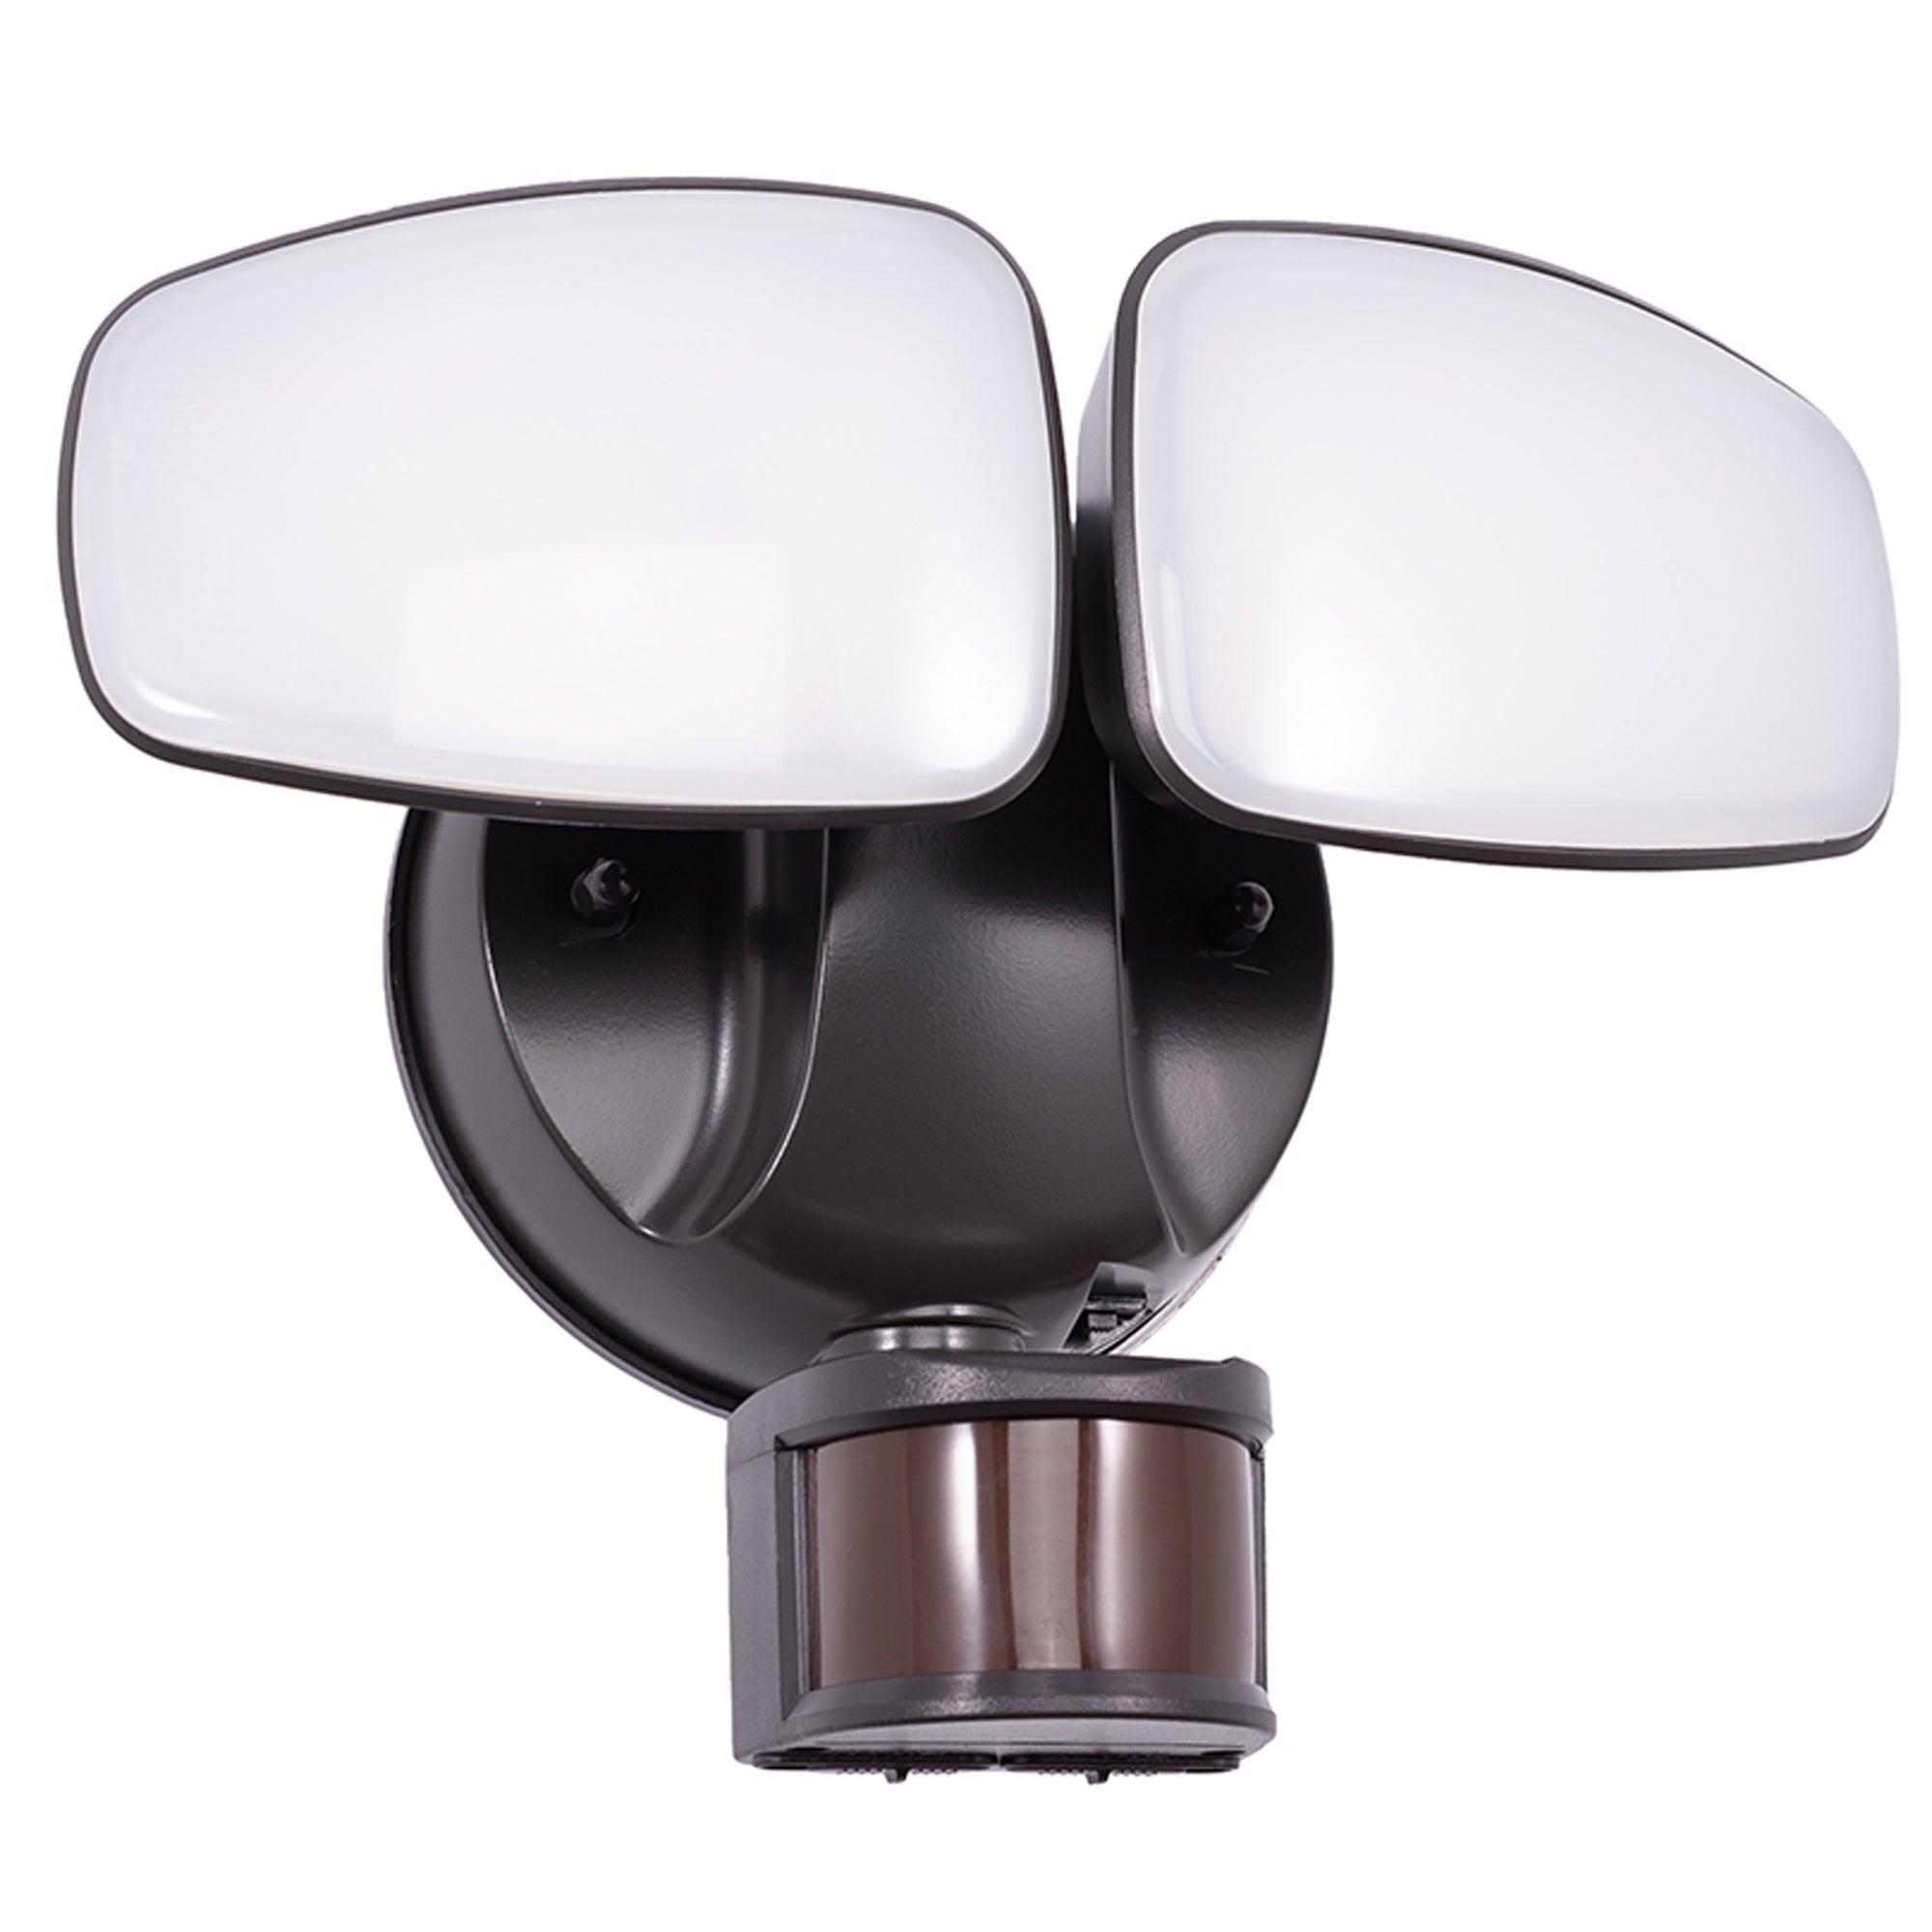 Outdoor lighting with adjustable color temperature options